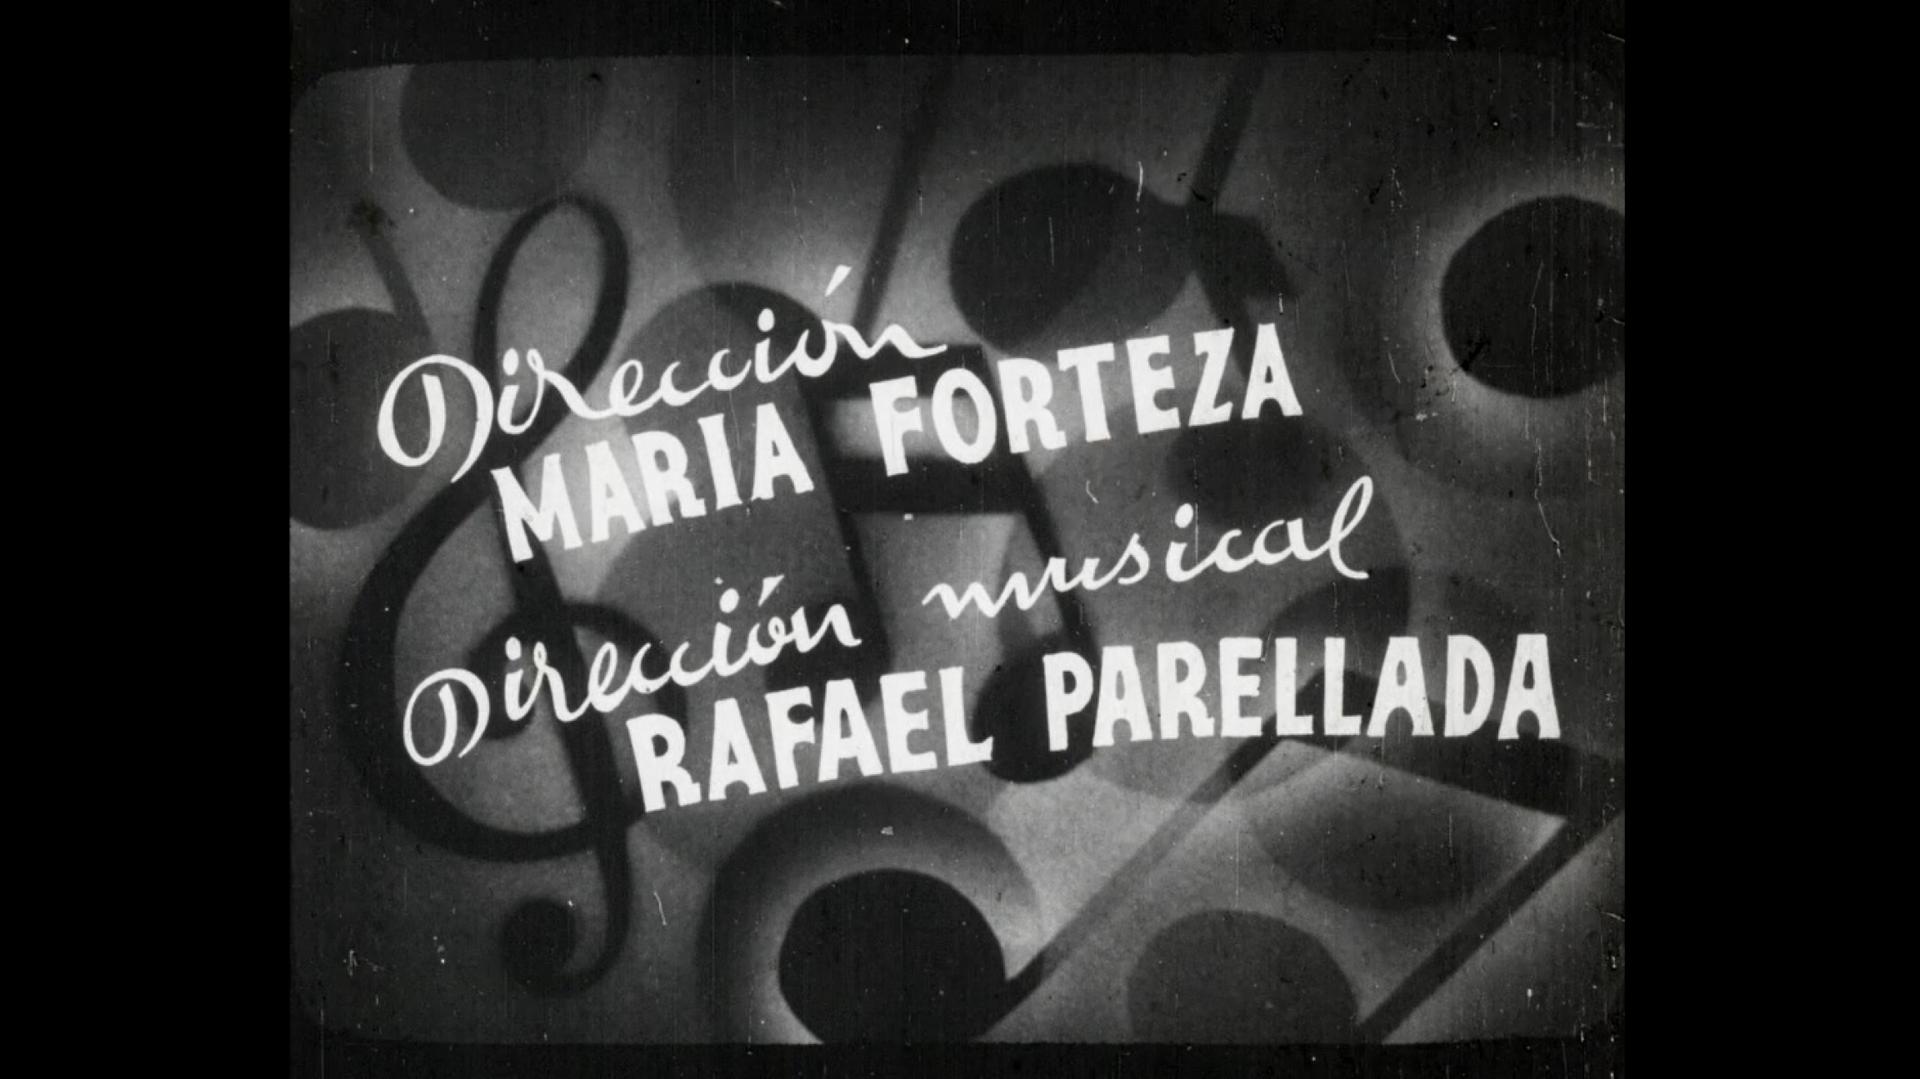 A screenshot of an old black and white film credit